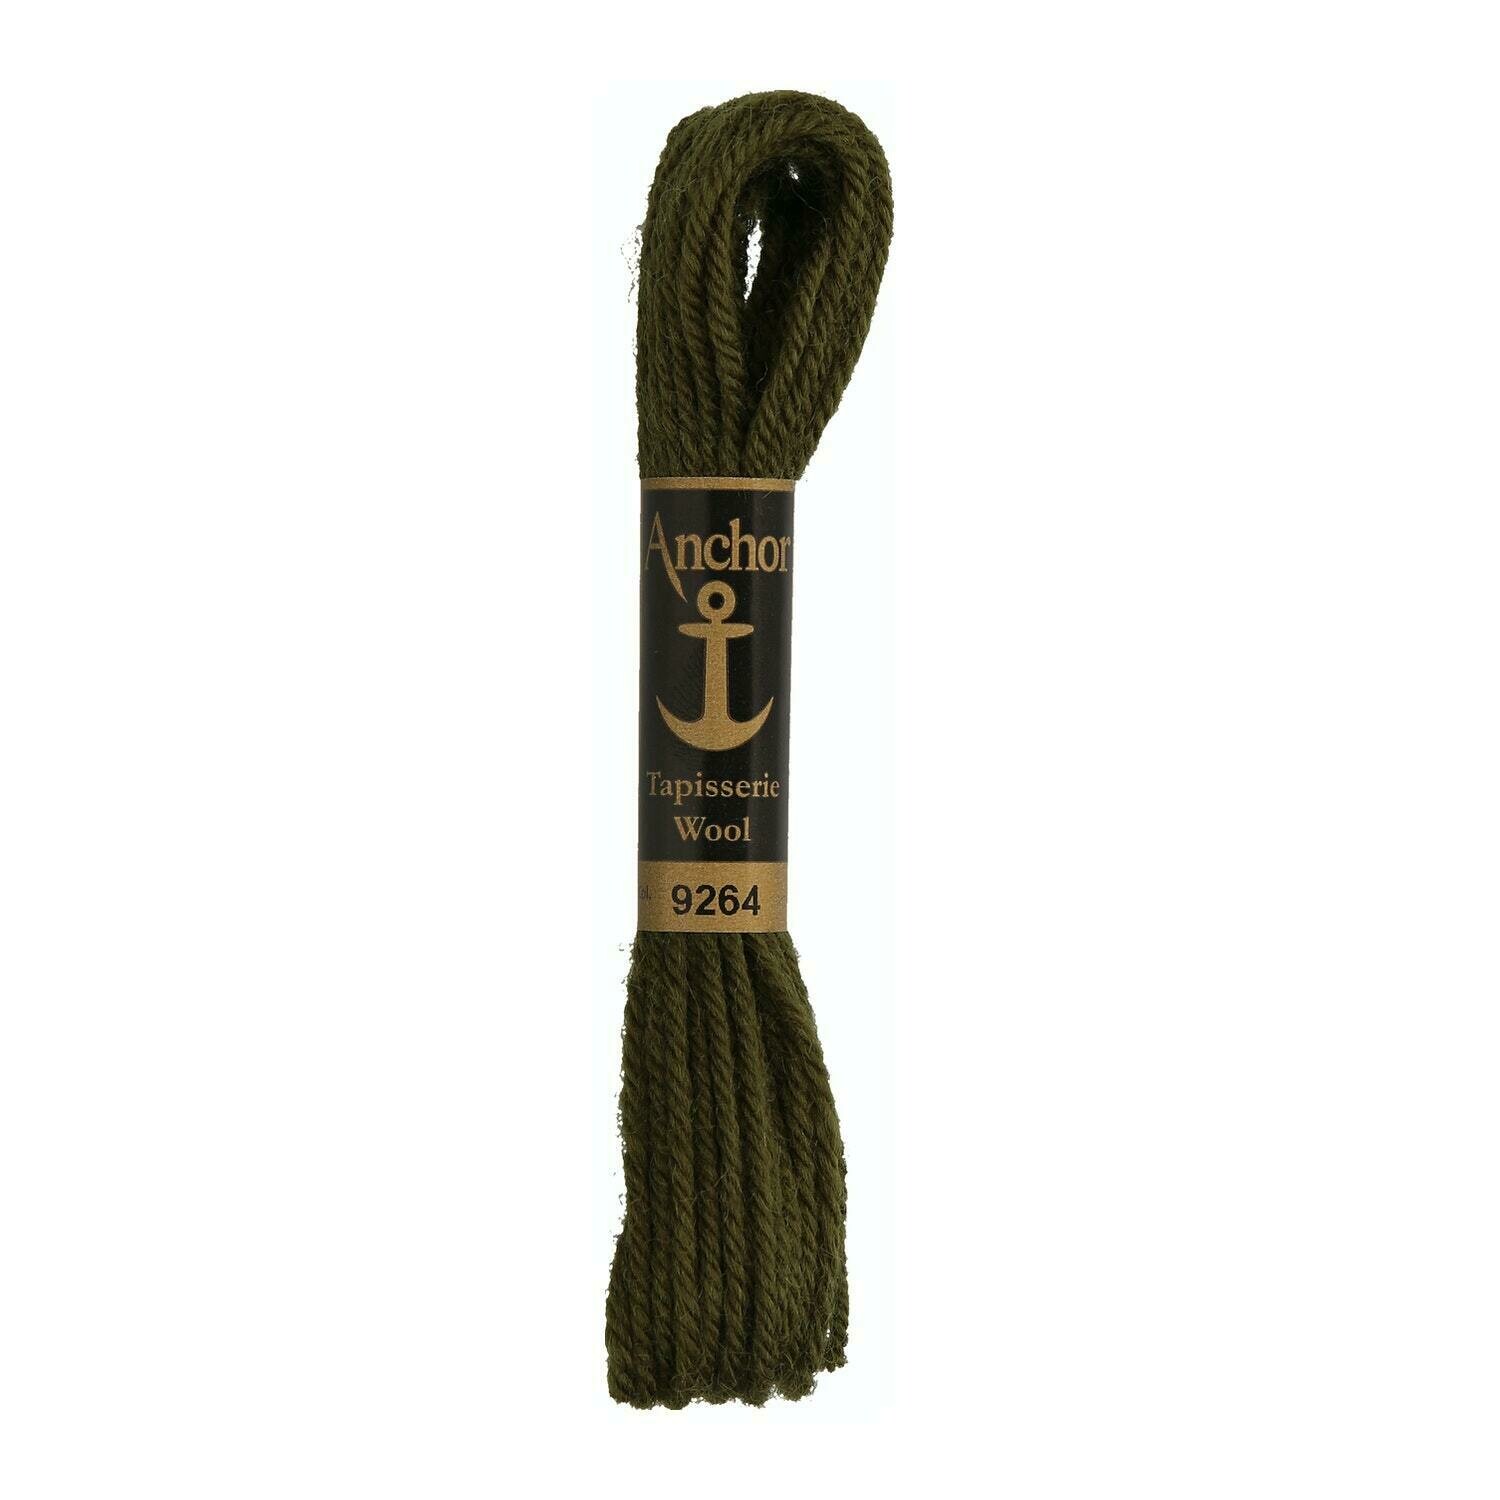 Anchor Tapisserie Wool #09264